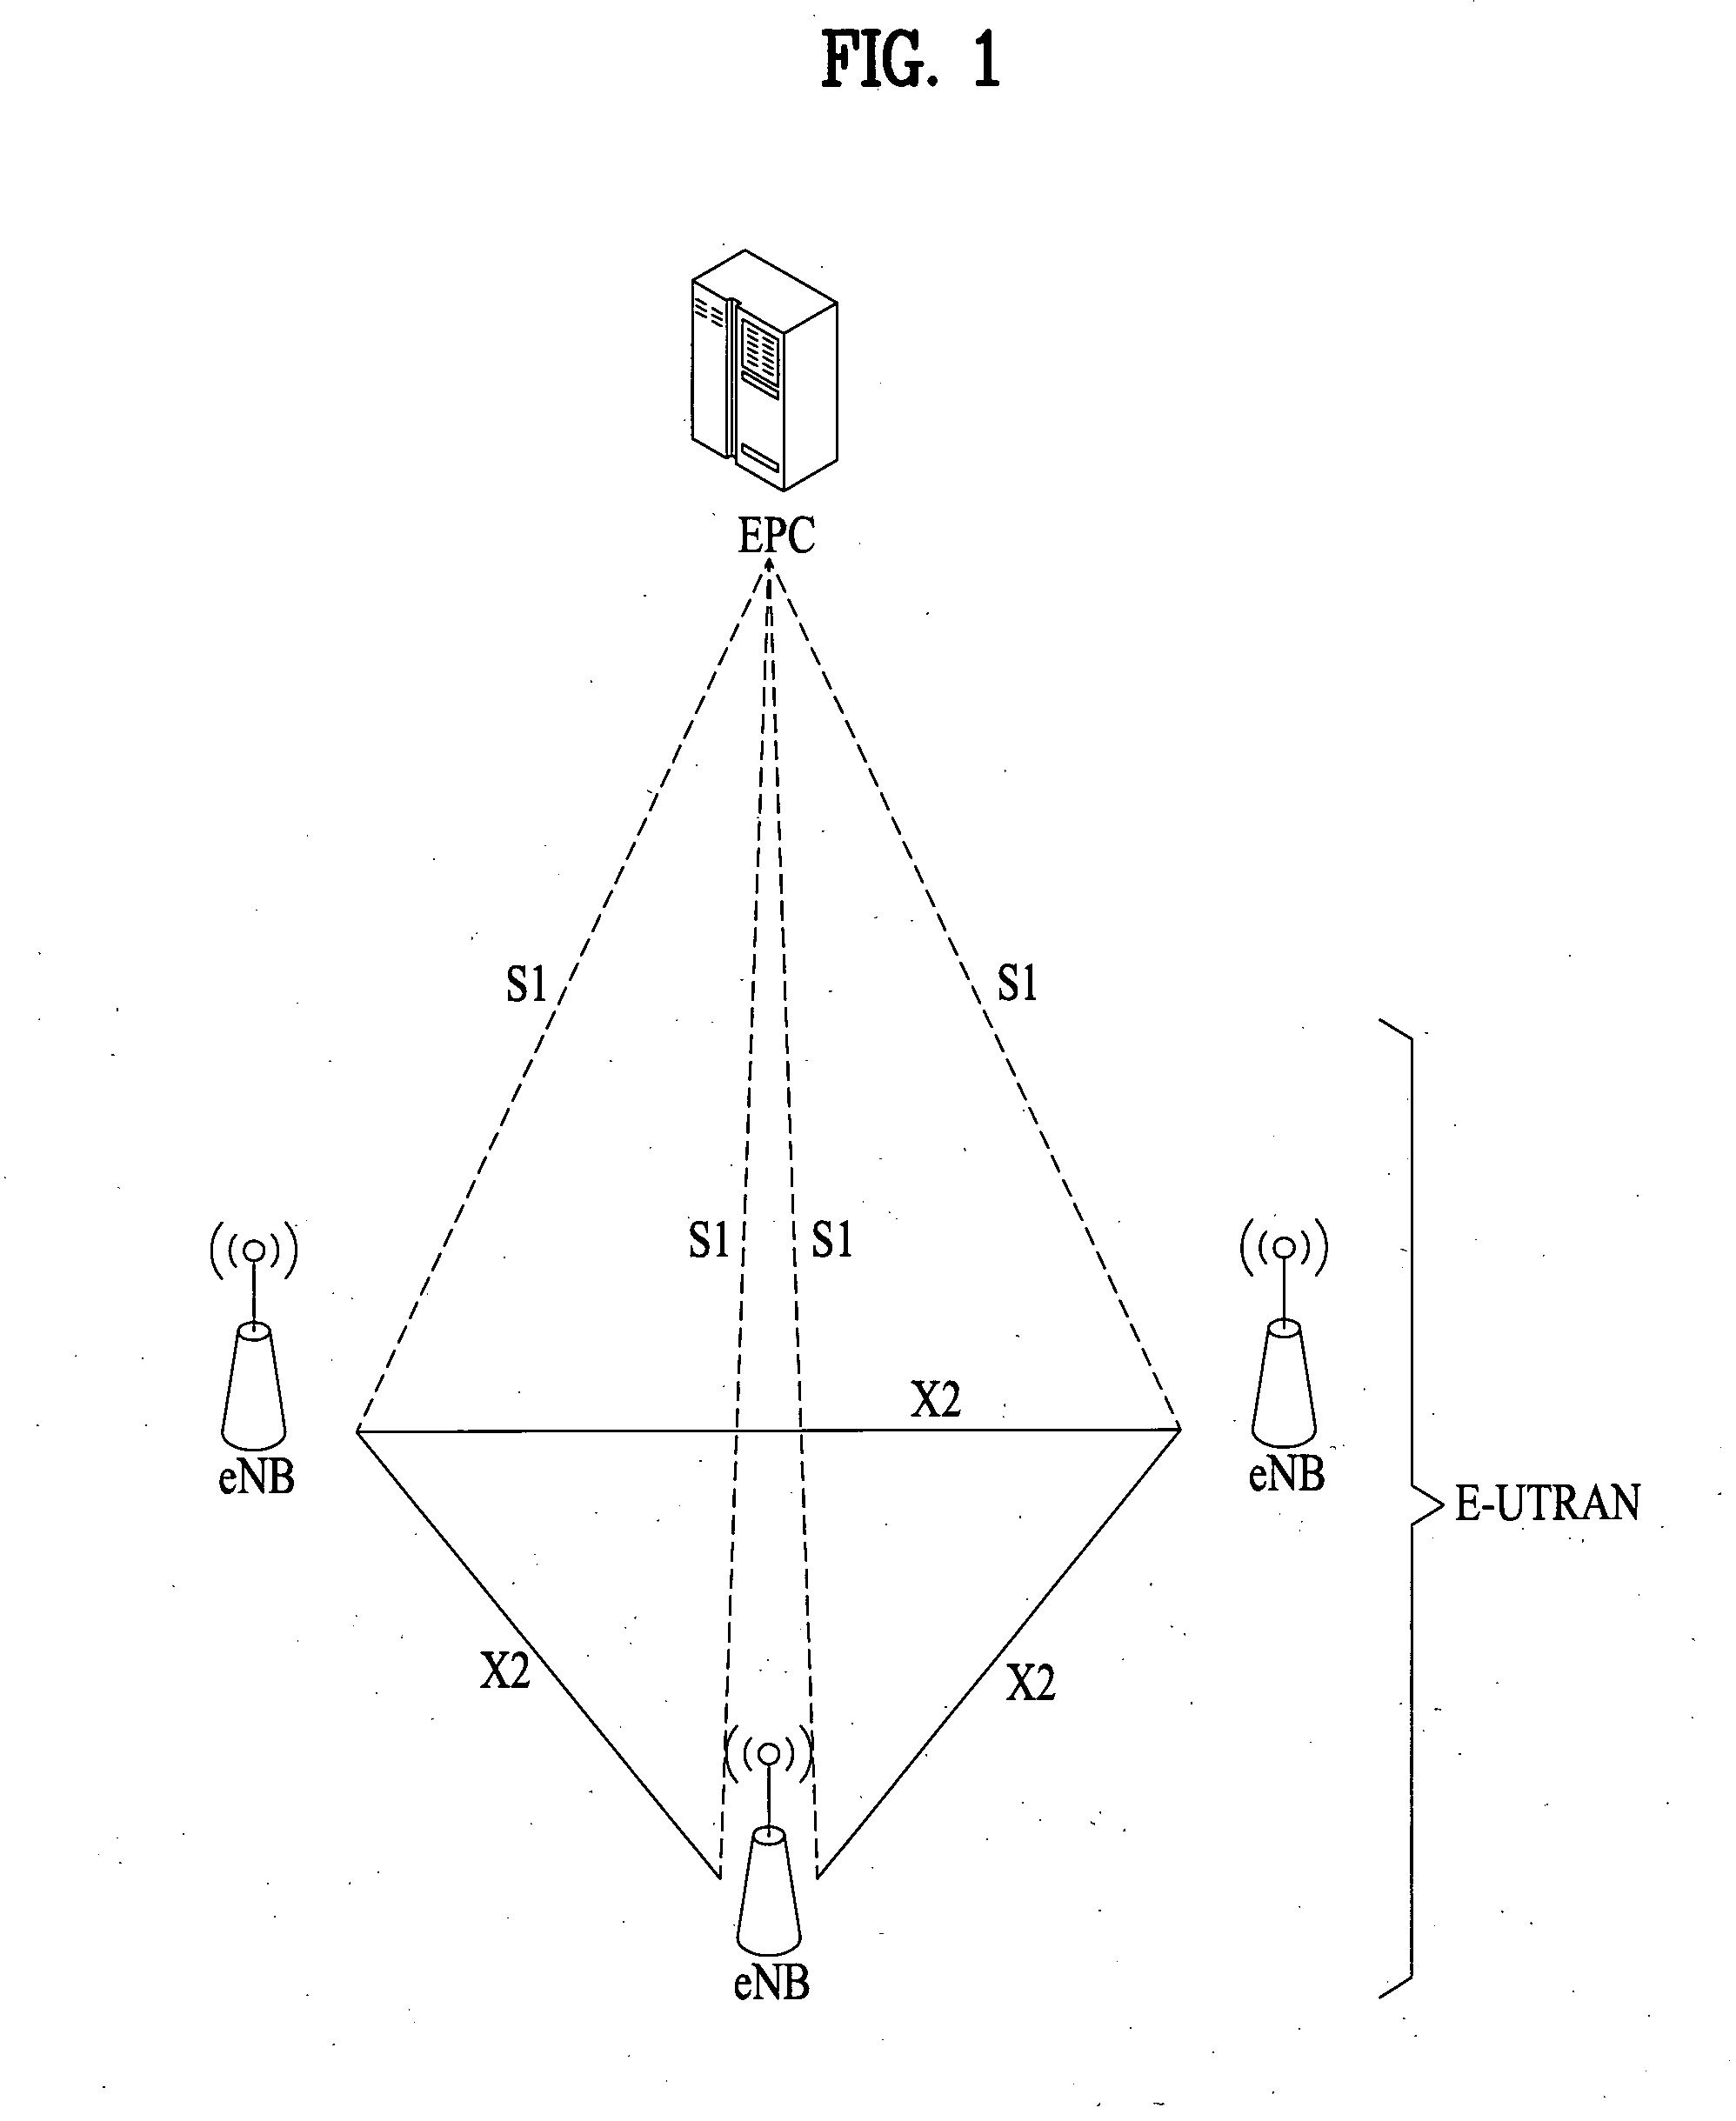 Method of performing random access in a wireless communcation system